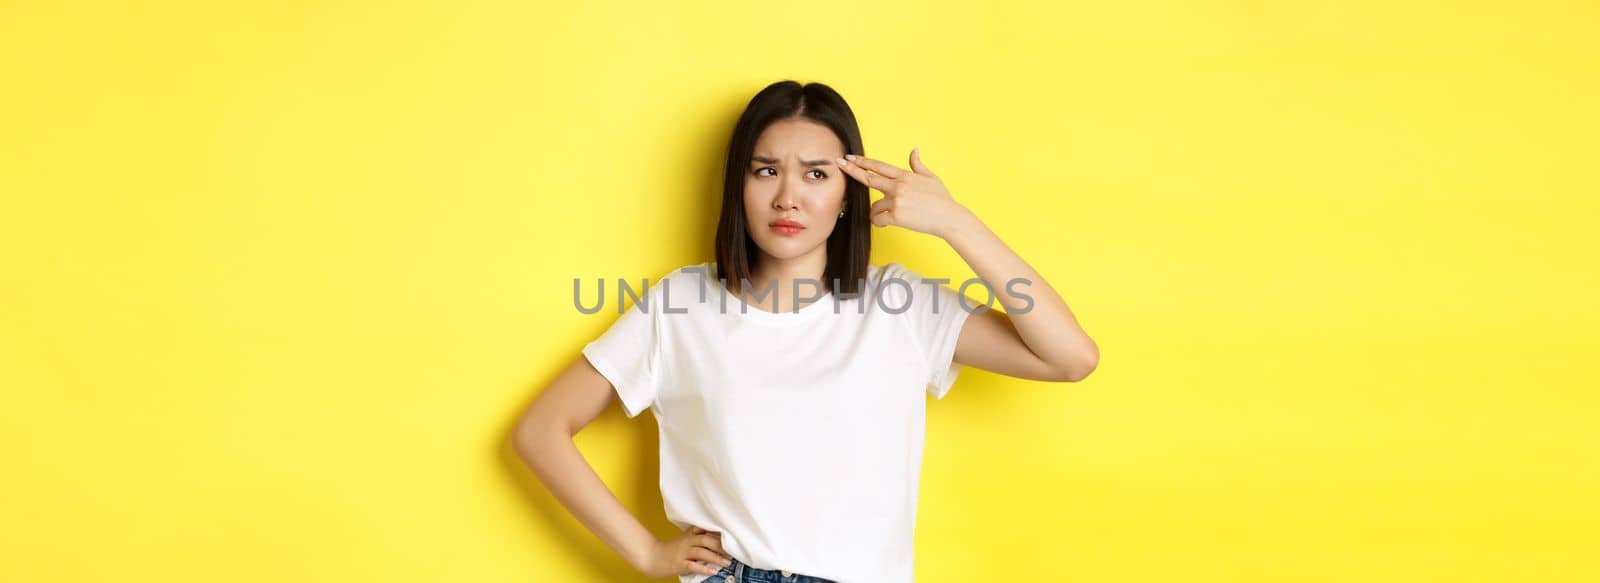 Woman showing kill me please gesture, shooting herself in head with finger gun from boredom, standing upset over yellow background.